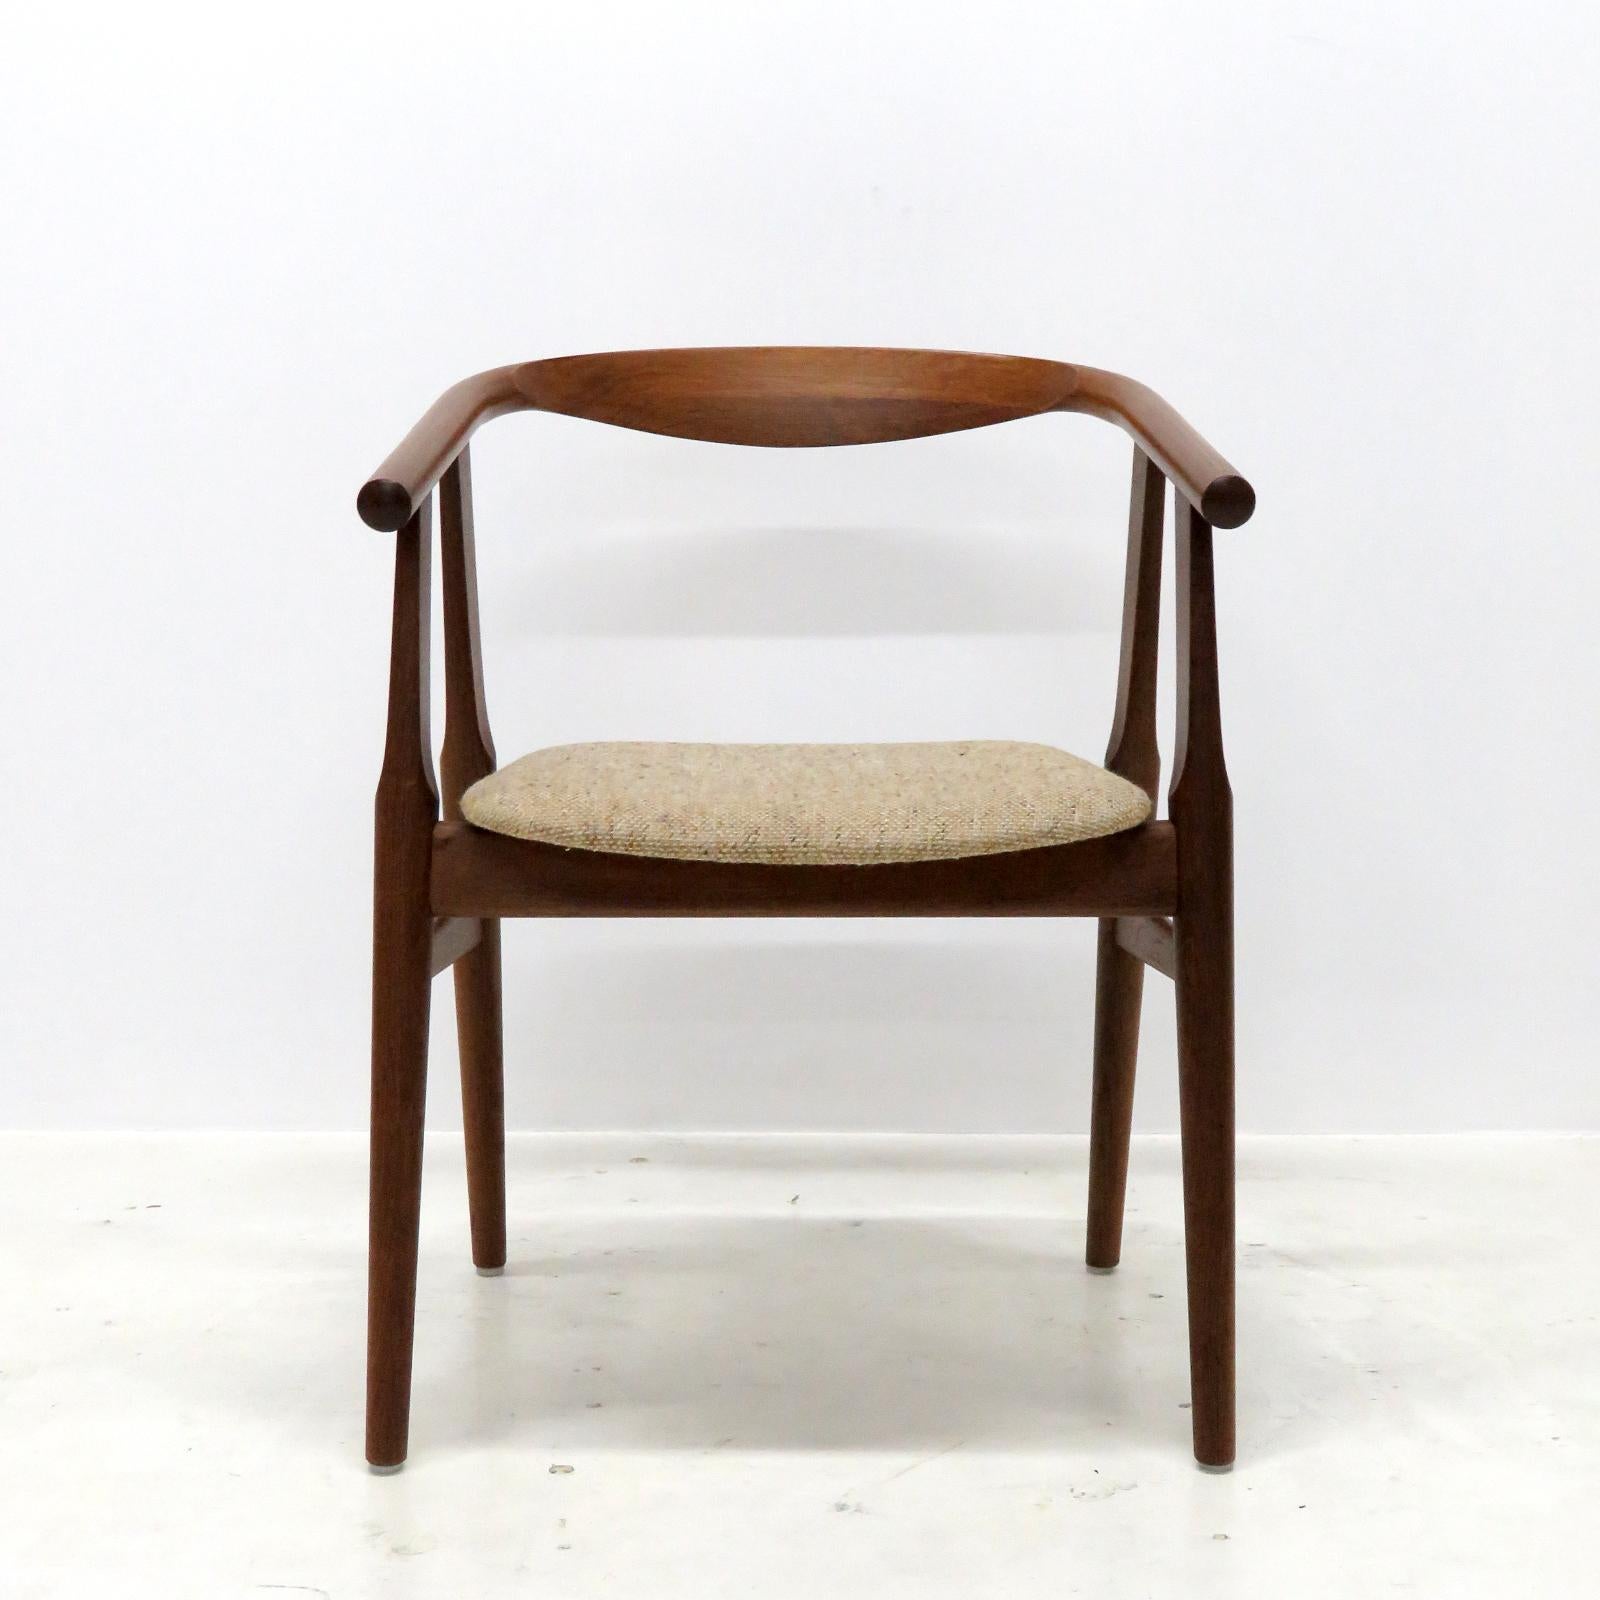 Wonderful set of six dining room chairs, model GE525, designed by Hans J. Wegner and manufactured by GETAMA in the 1960s, in smoked oak and light colored, speckled wool upholstery, marked, listed as a set of 6.